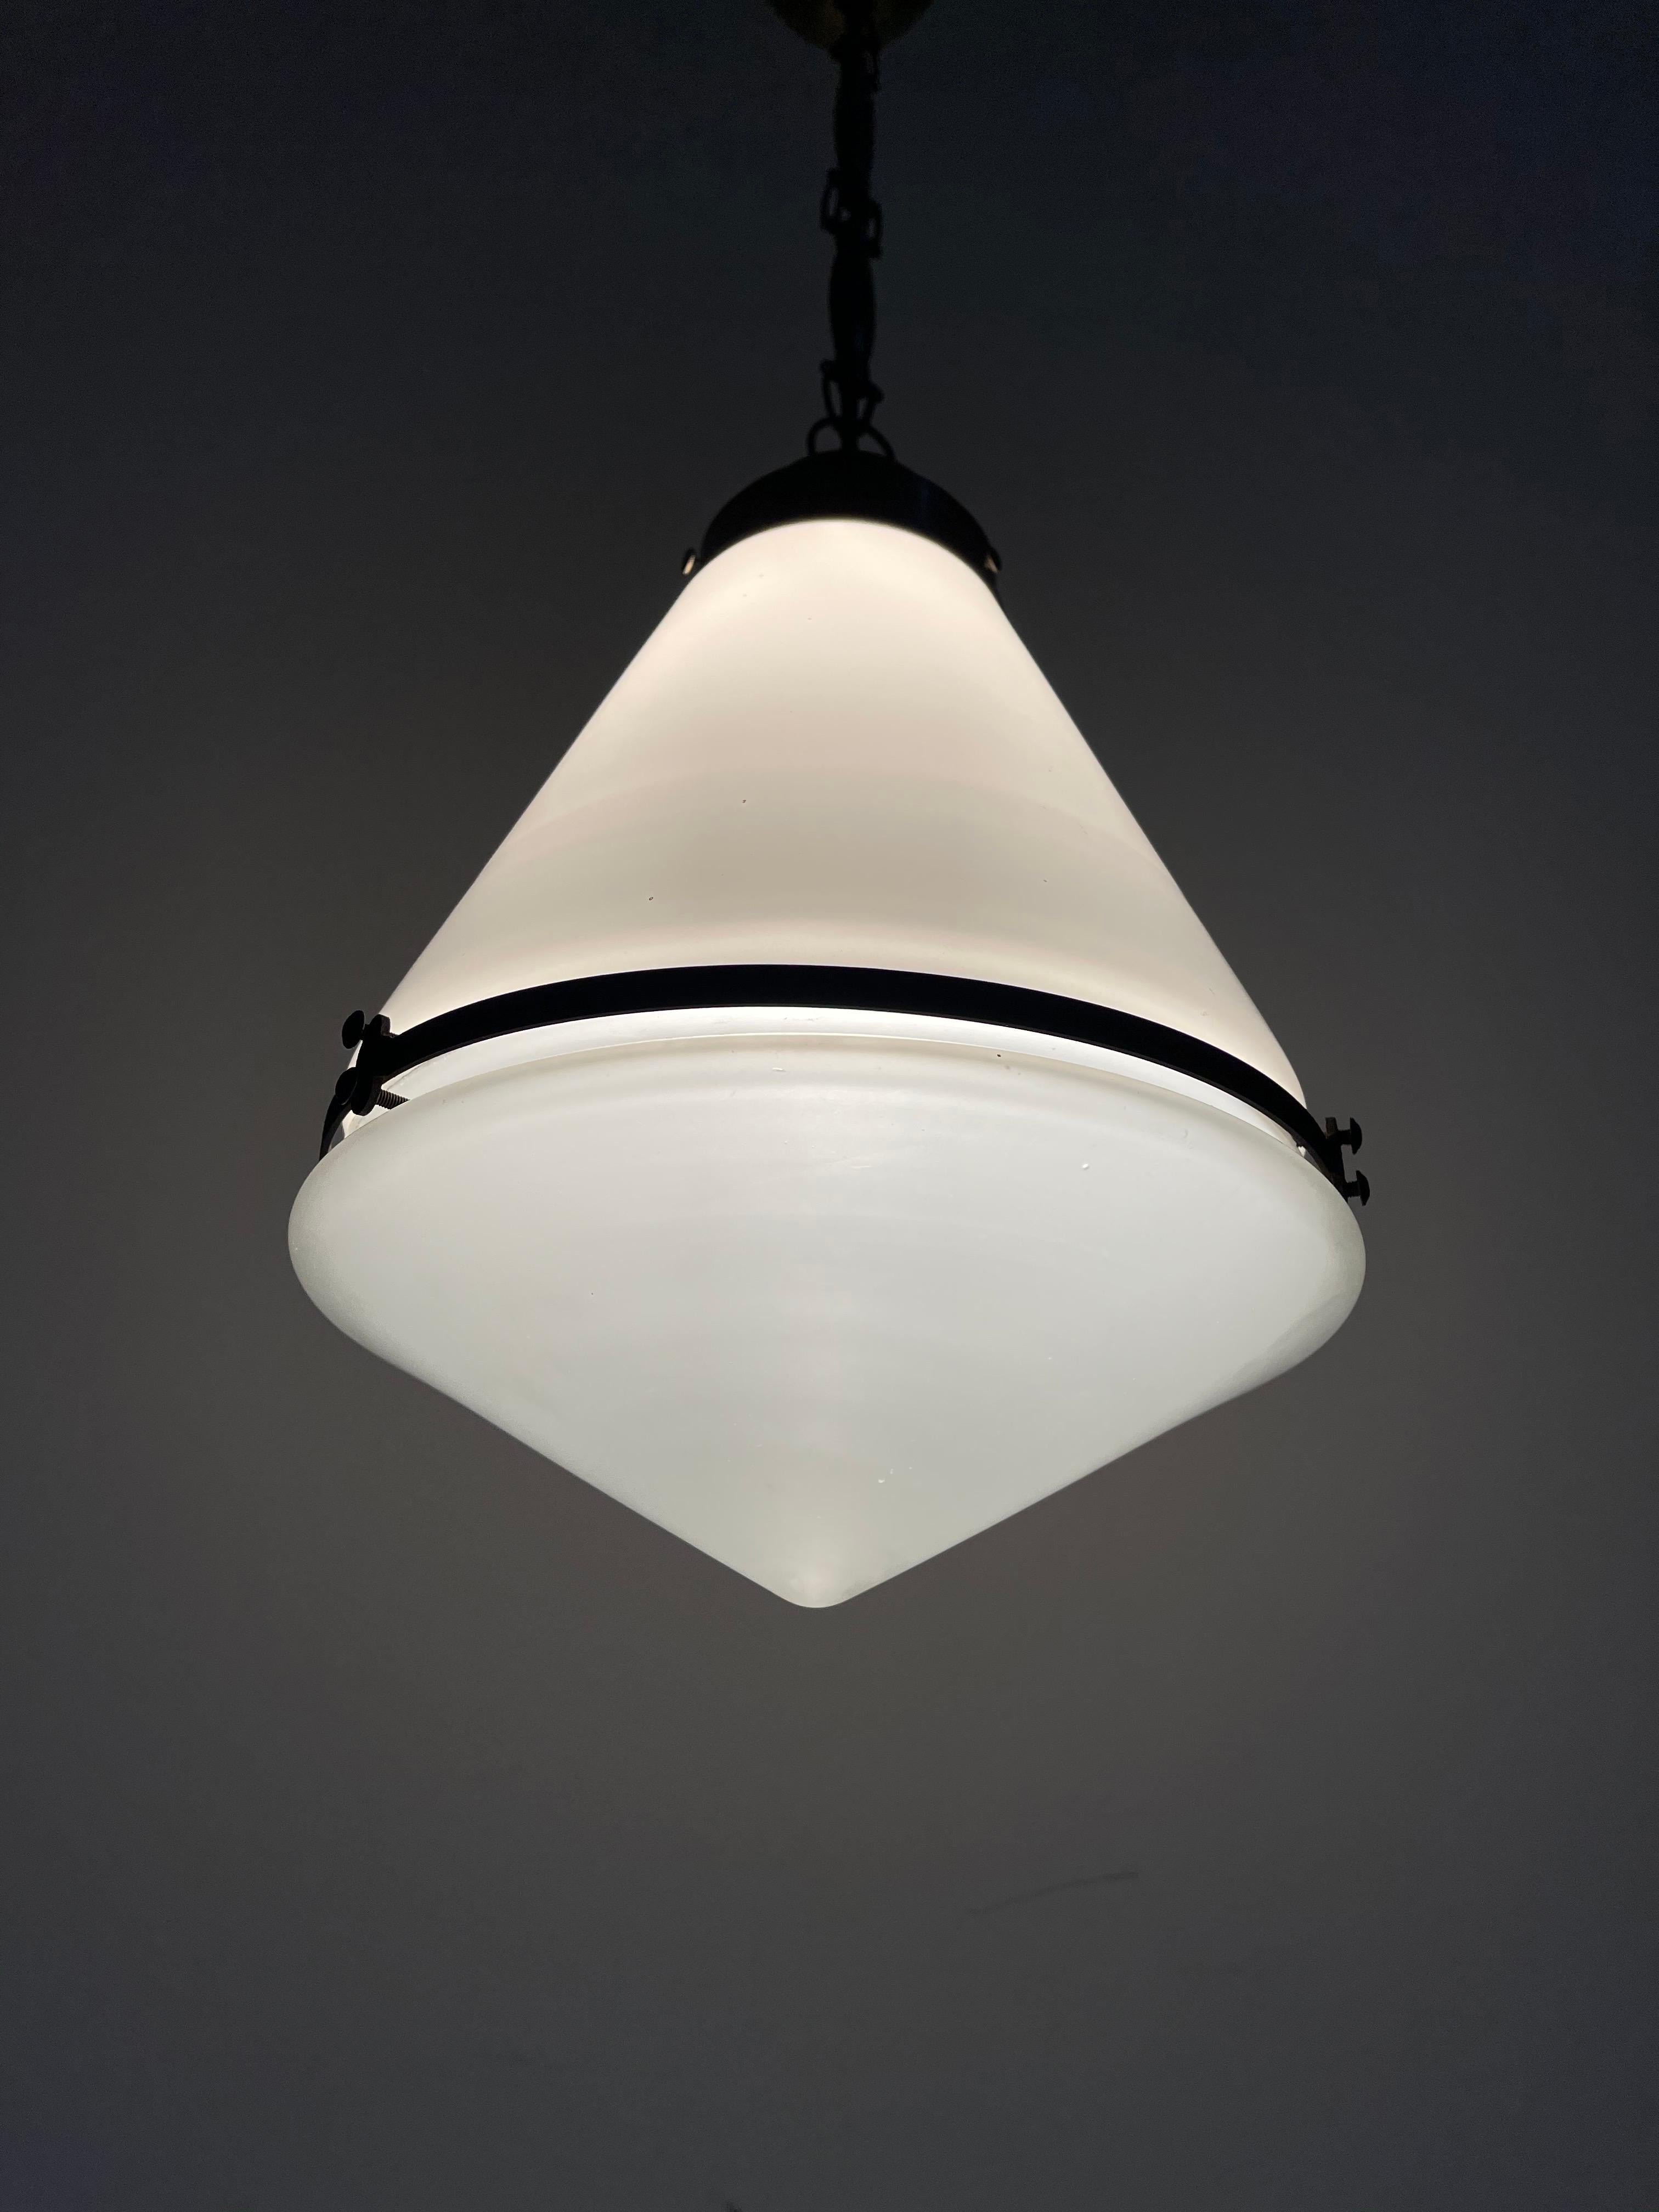 Antique Conical Opaline Milk Glass Ceiling Pendant Light by Peter Behrens In Good Condition For Sale In Sale, GB